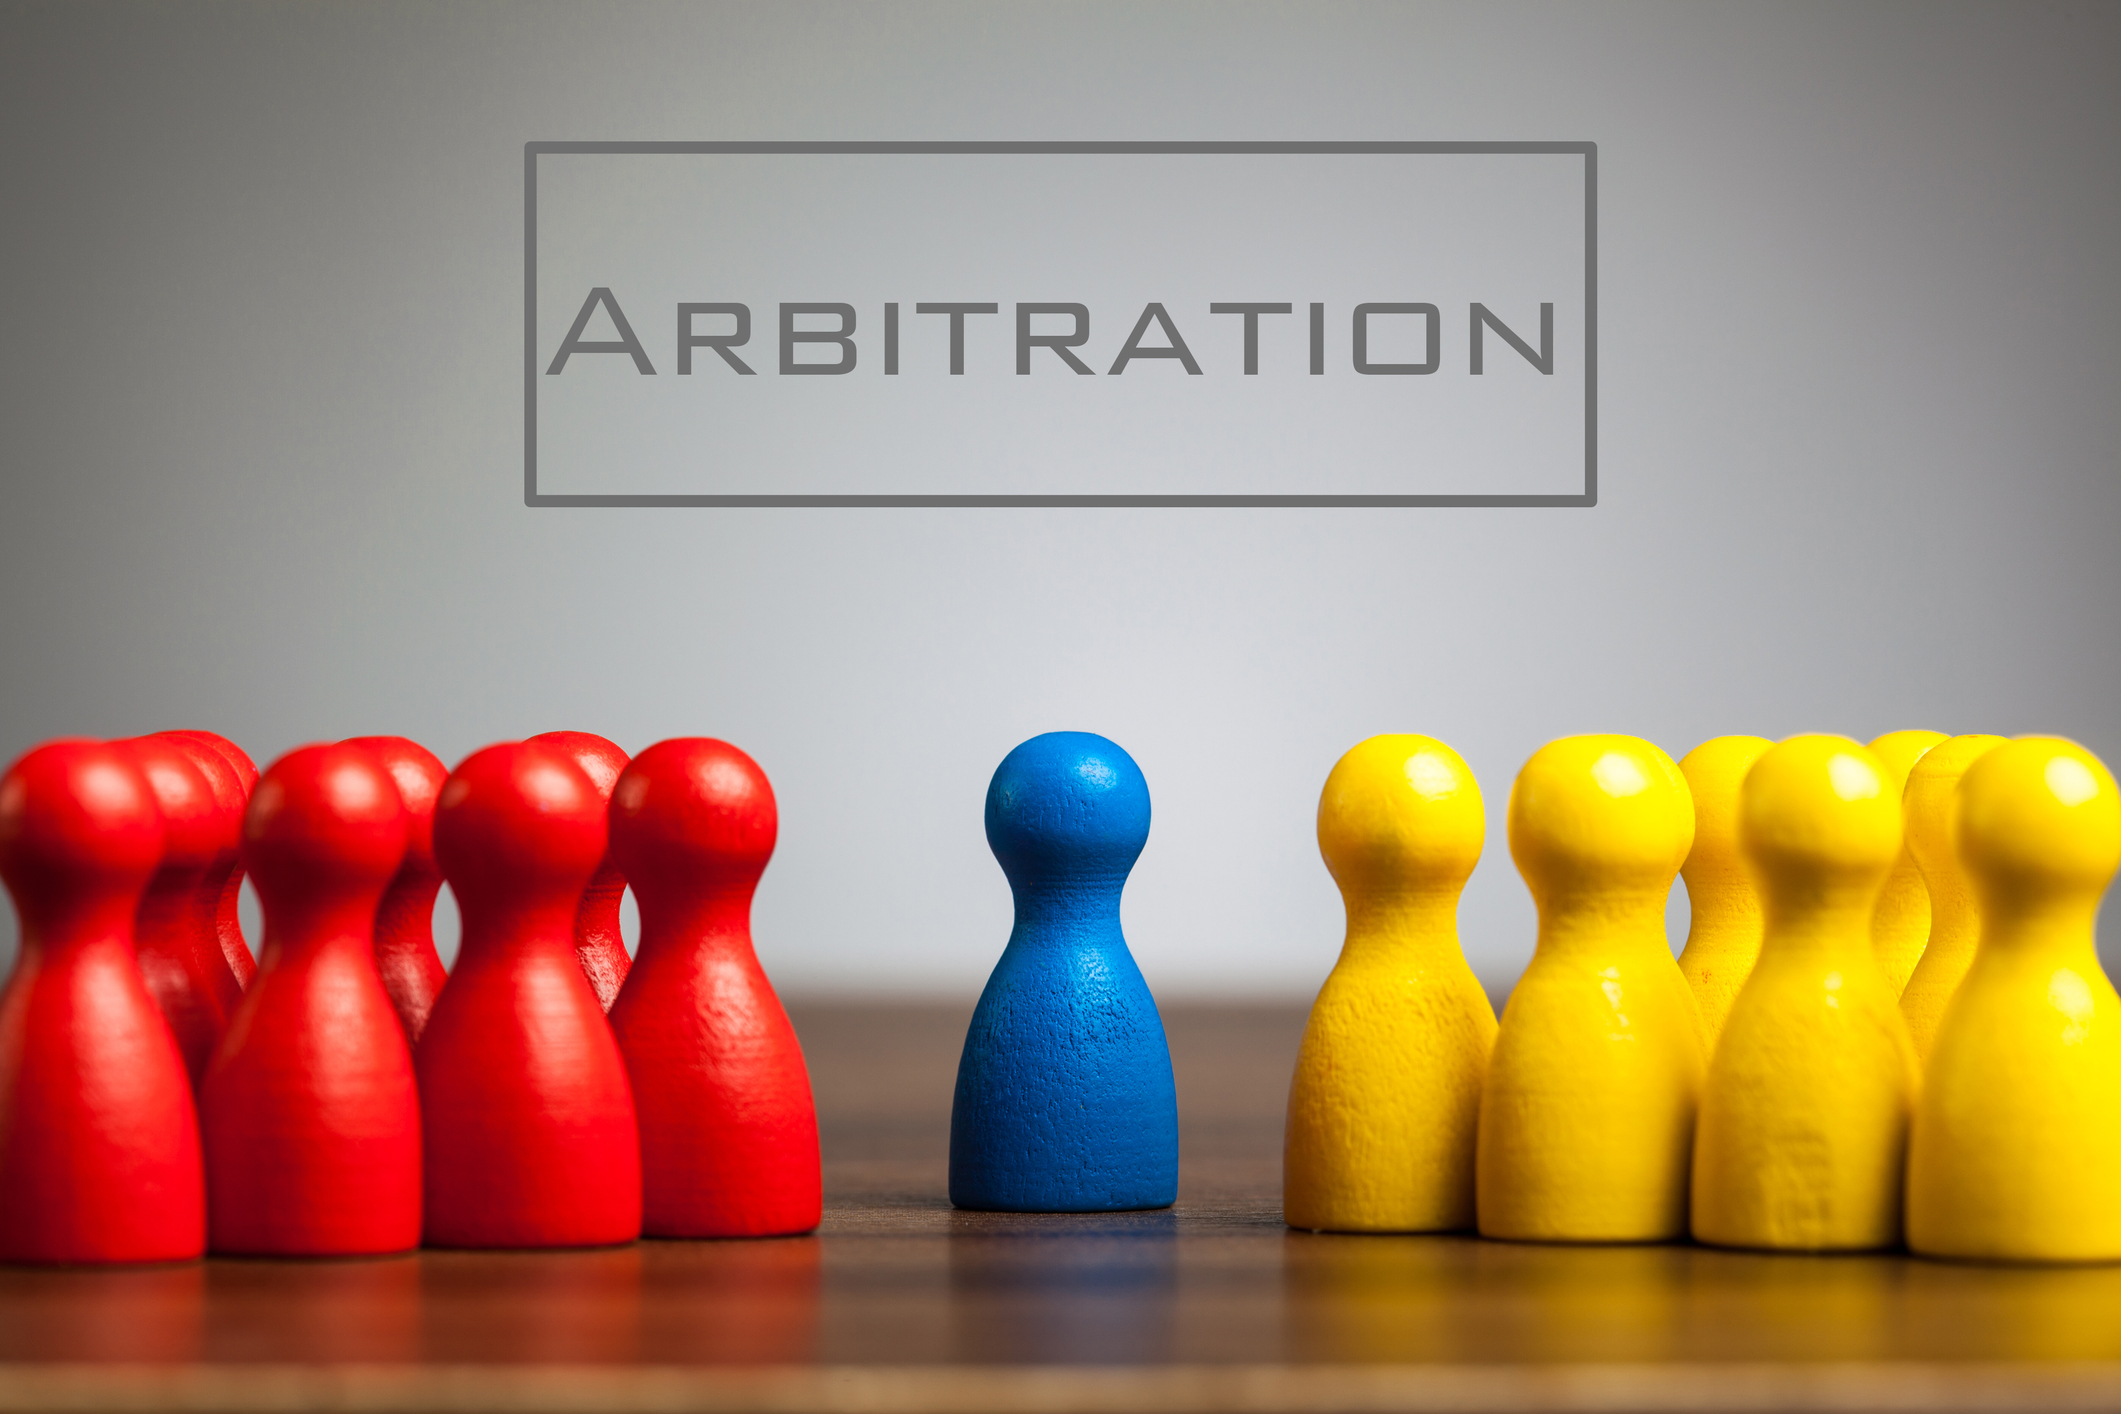 NJ Supreme Court: Arbitration Agreements Are Enforceable Even If They Do Not Designate an Arbitral Forum or Process for Choosing an Arbitration Mechanism or Setting